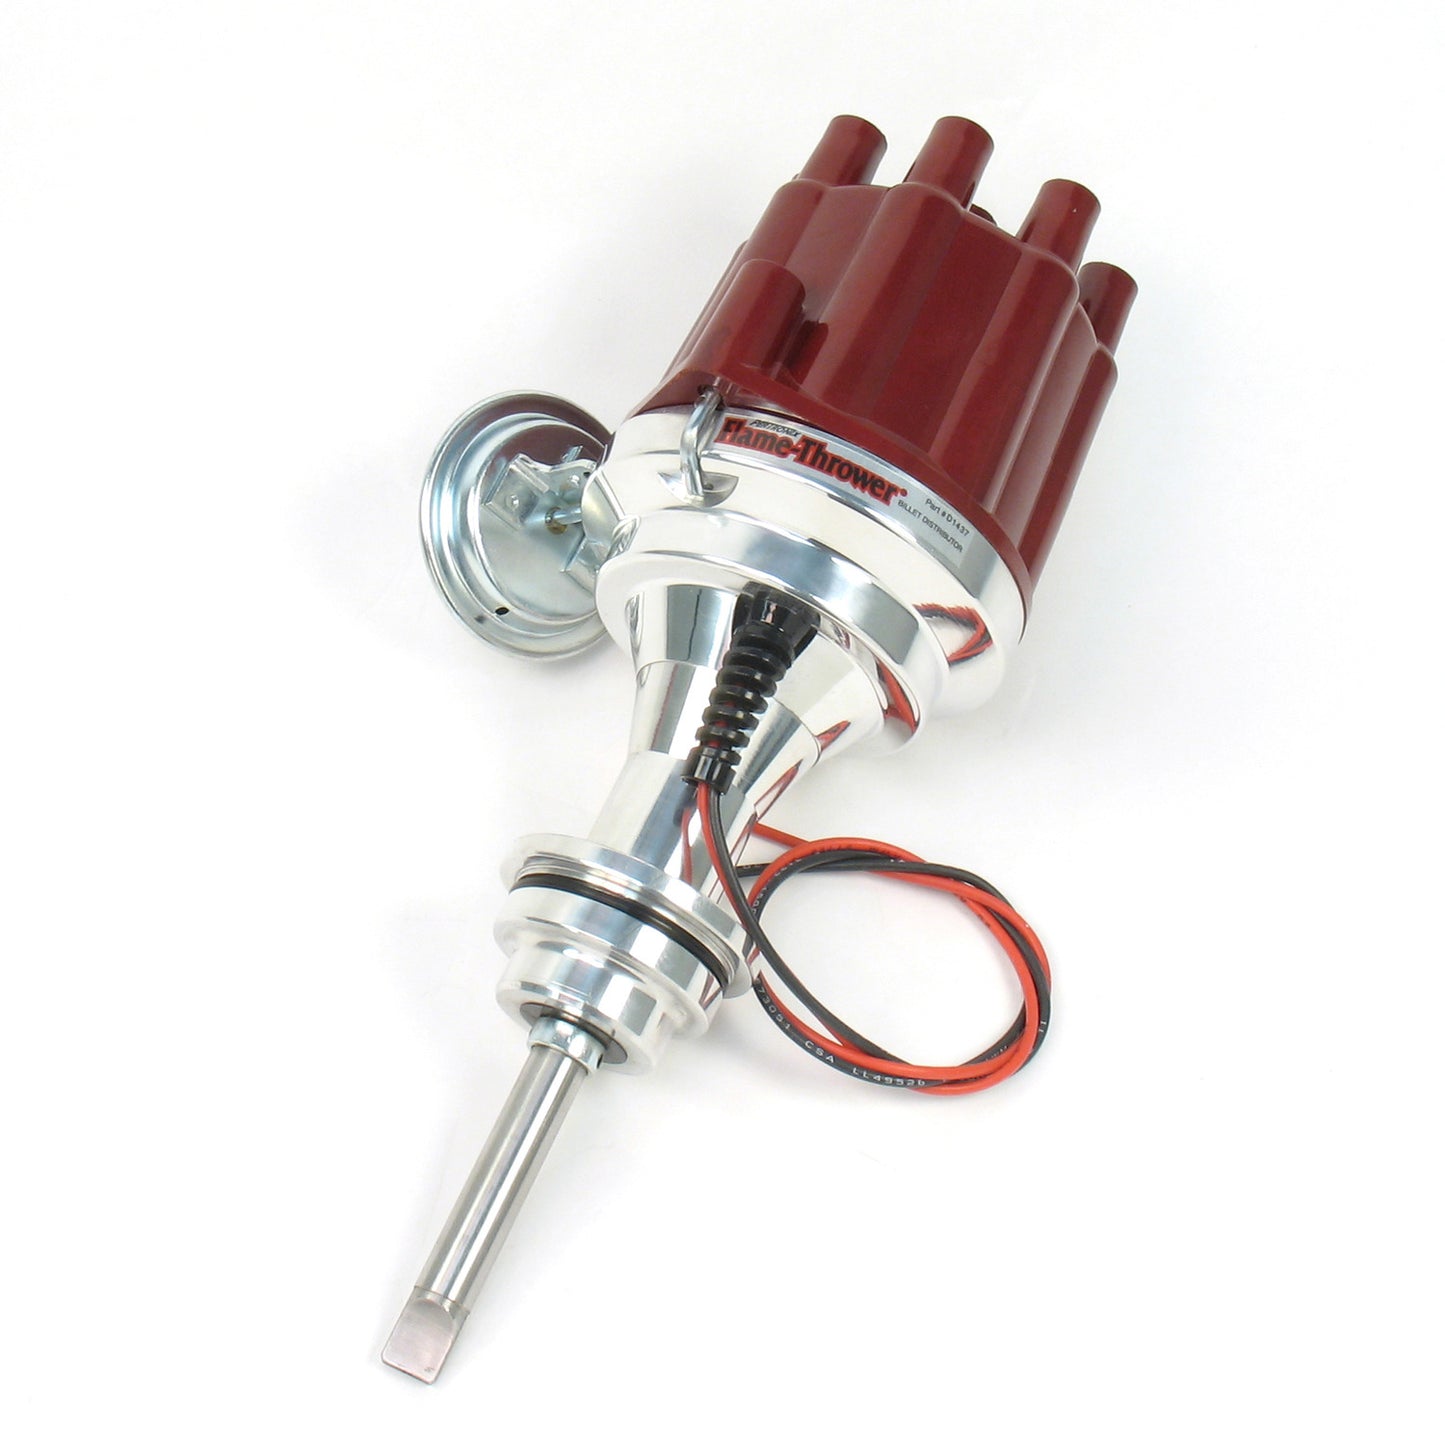 PerTronix D7143701 Flame-Thrower Electronic Distributor Billet Chrysler/Dodge/Plymouth 426-440 with Ignitor III Vacuum Advance Red Cap